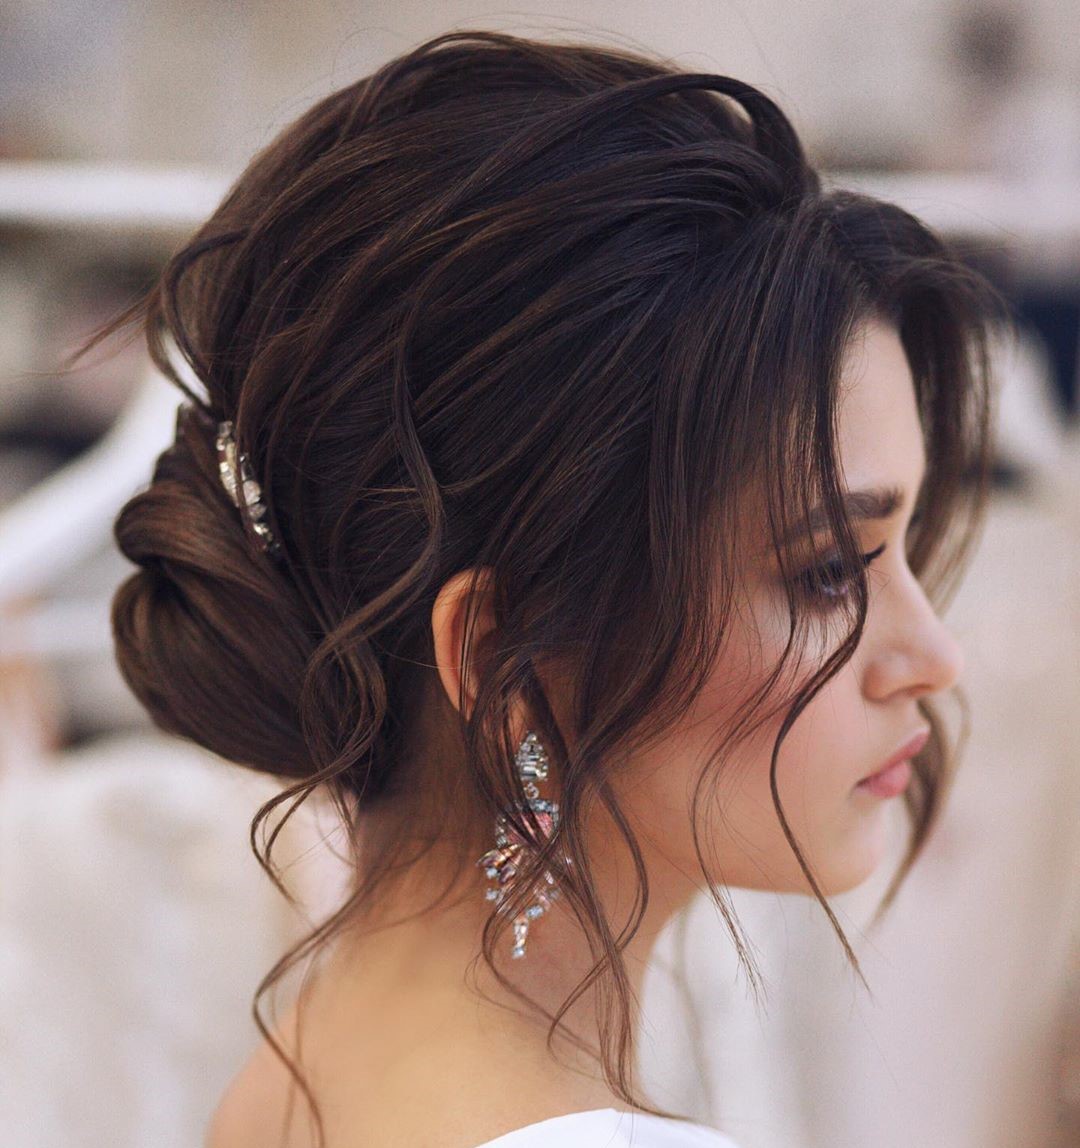 Fancy Loose Updo with Waves